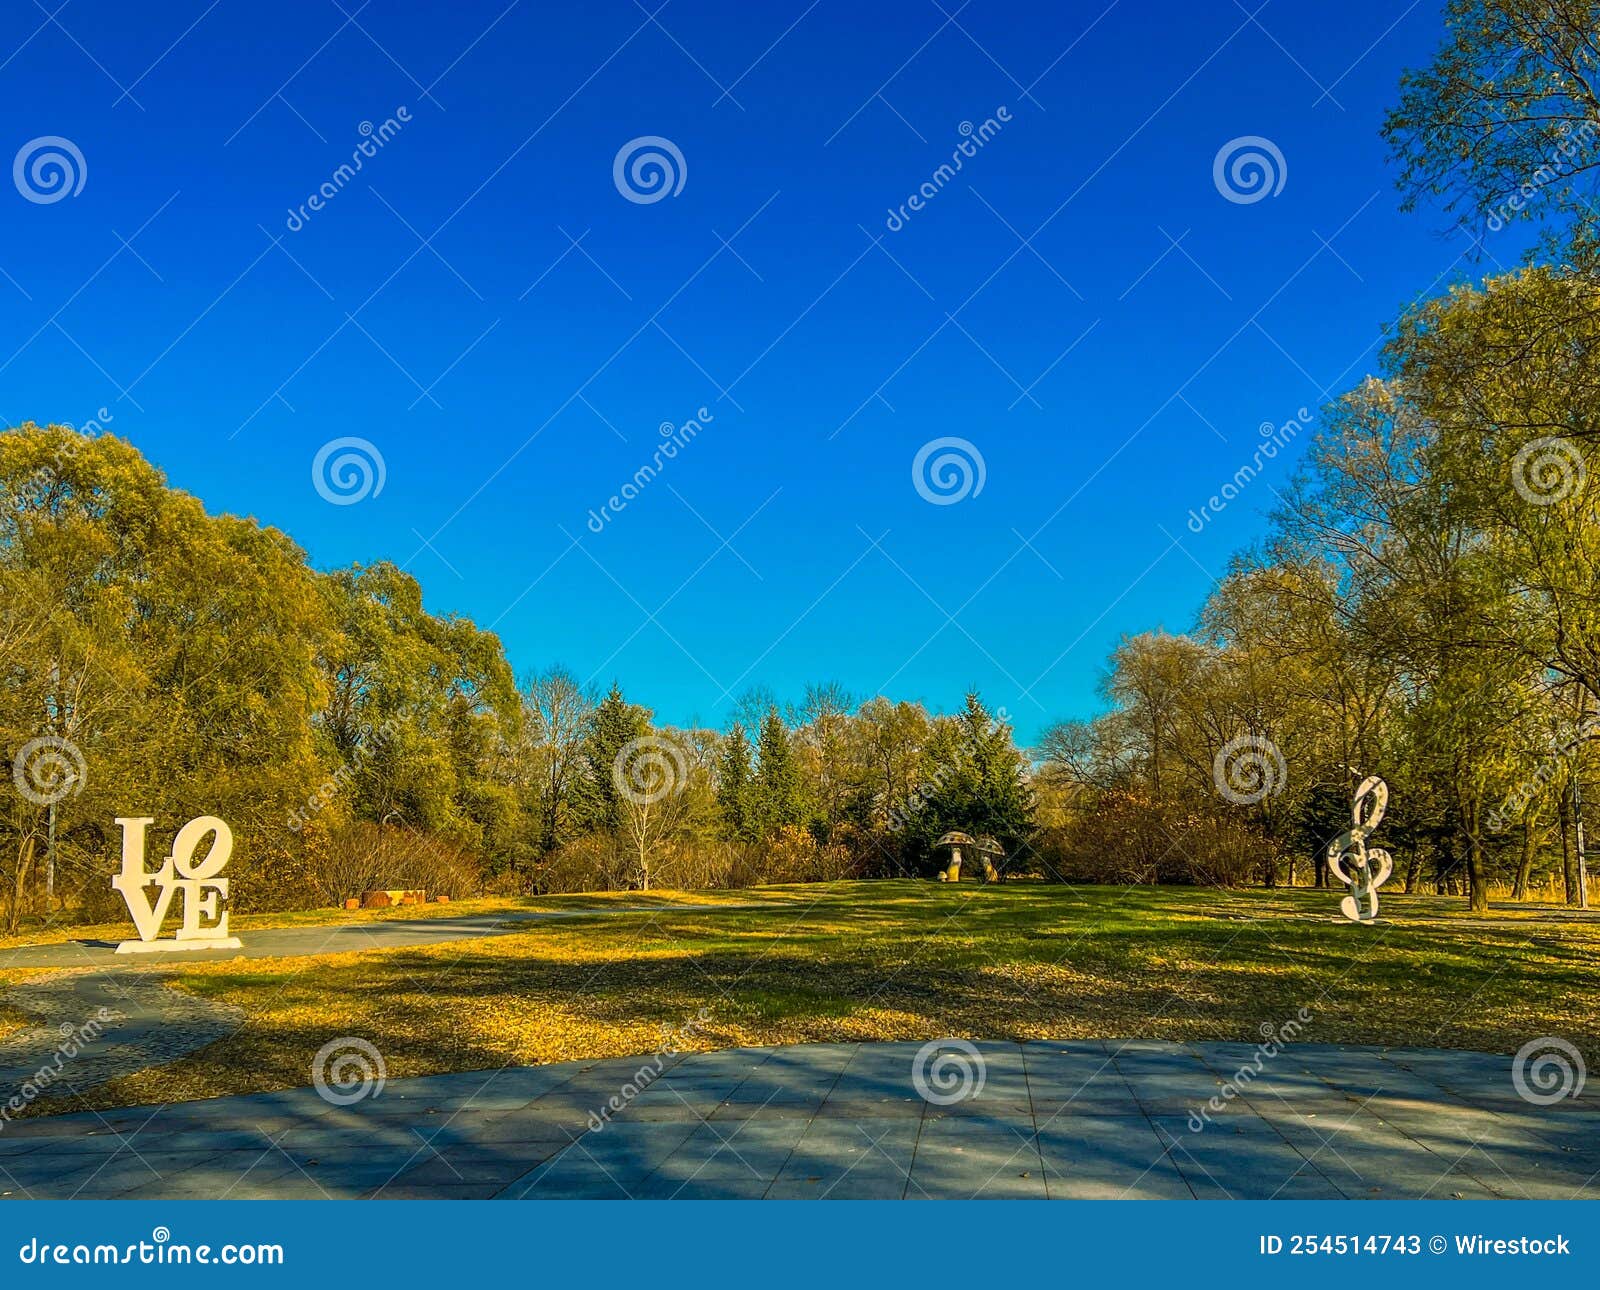 summer park scene with love text, clave de sol sign and mushrooms sculptures